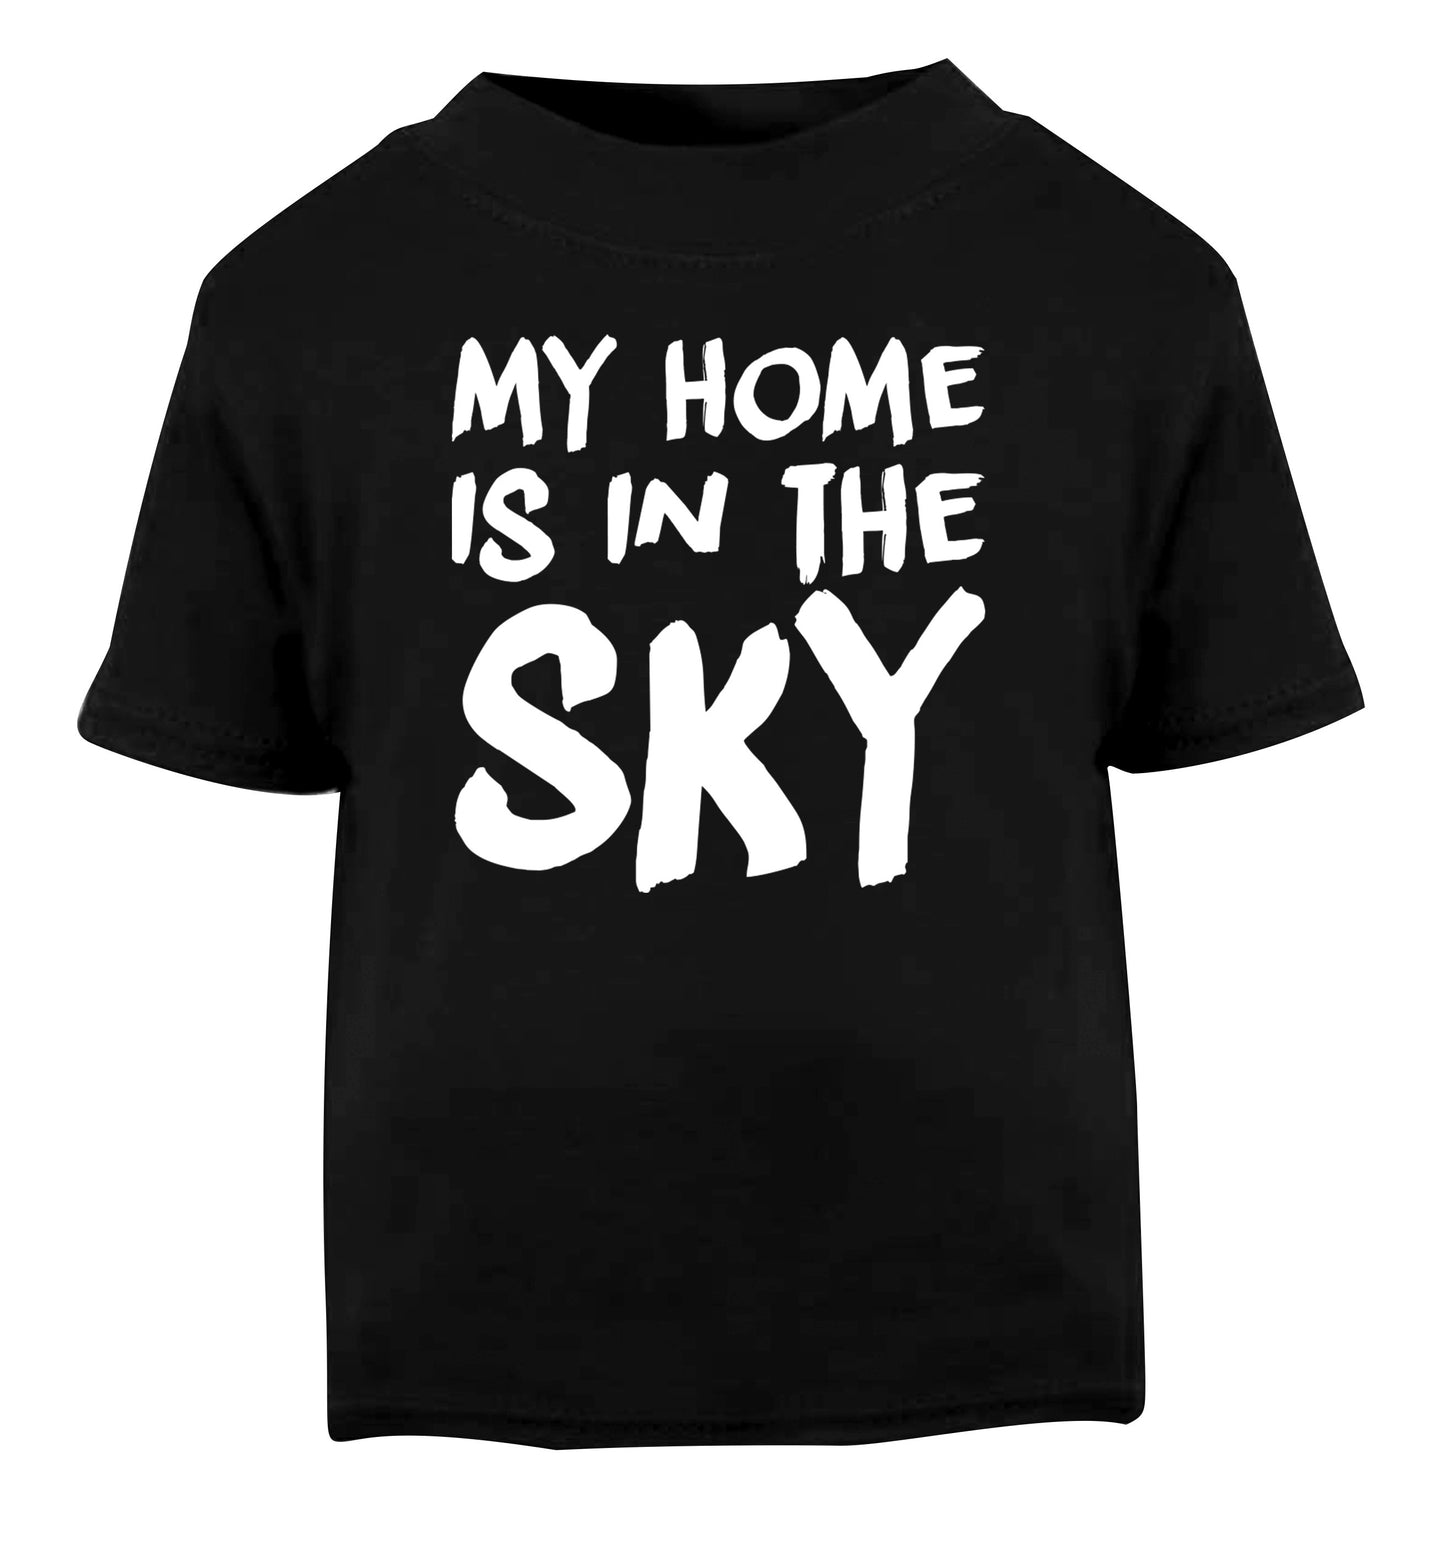 My home is in the sky Black Baby Toddler Tshirt 2 years